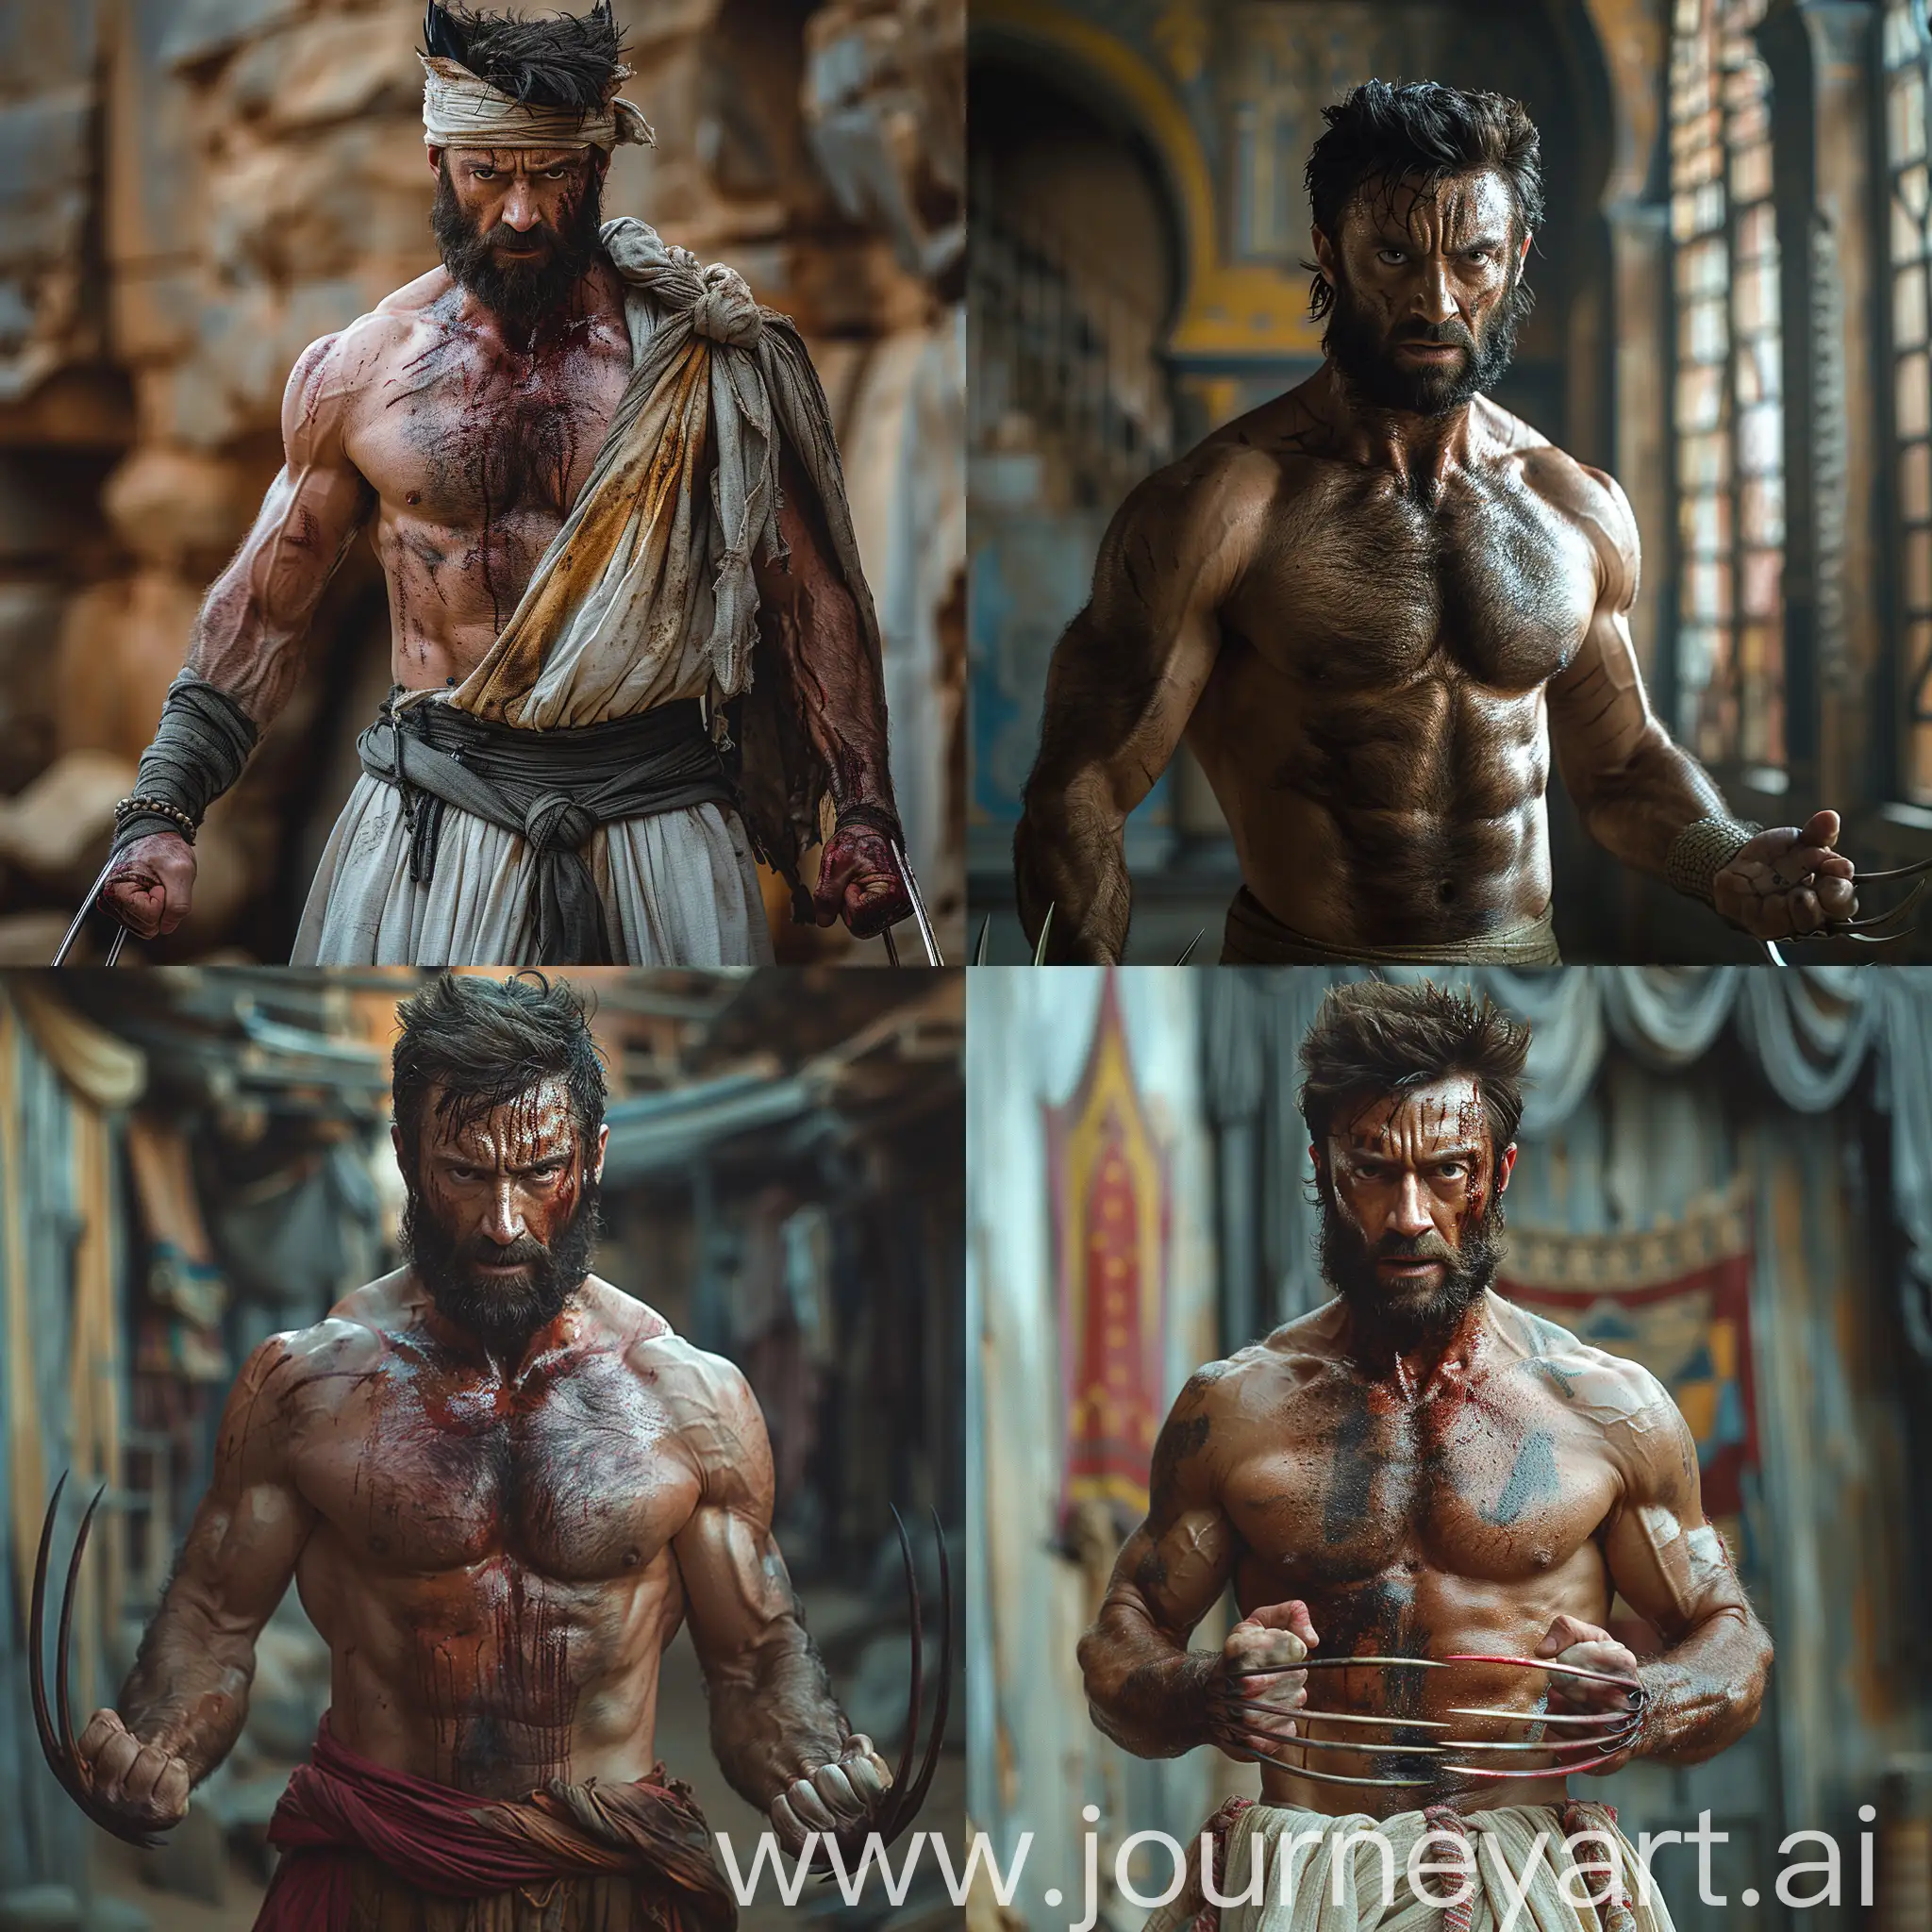 Hugh-Jackman-as-Wolverine-in-Epic-Arabian-Attire-with-Claws